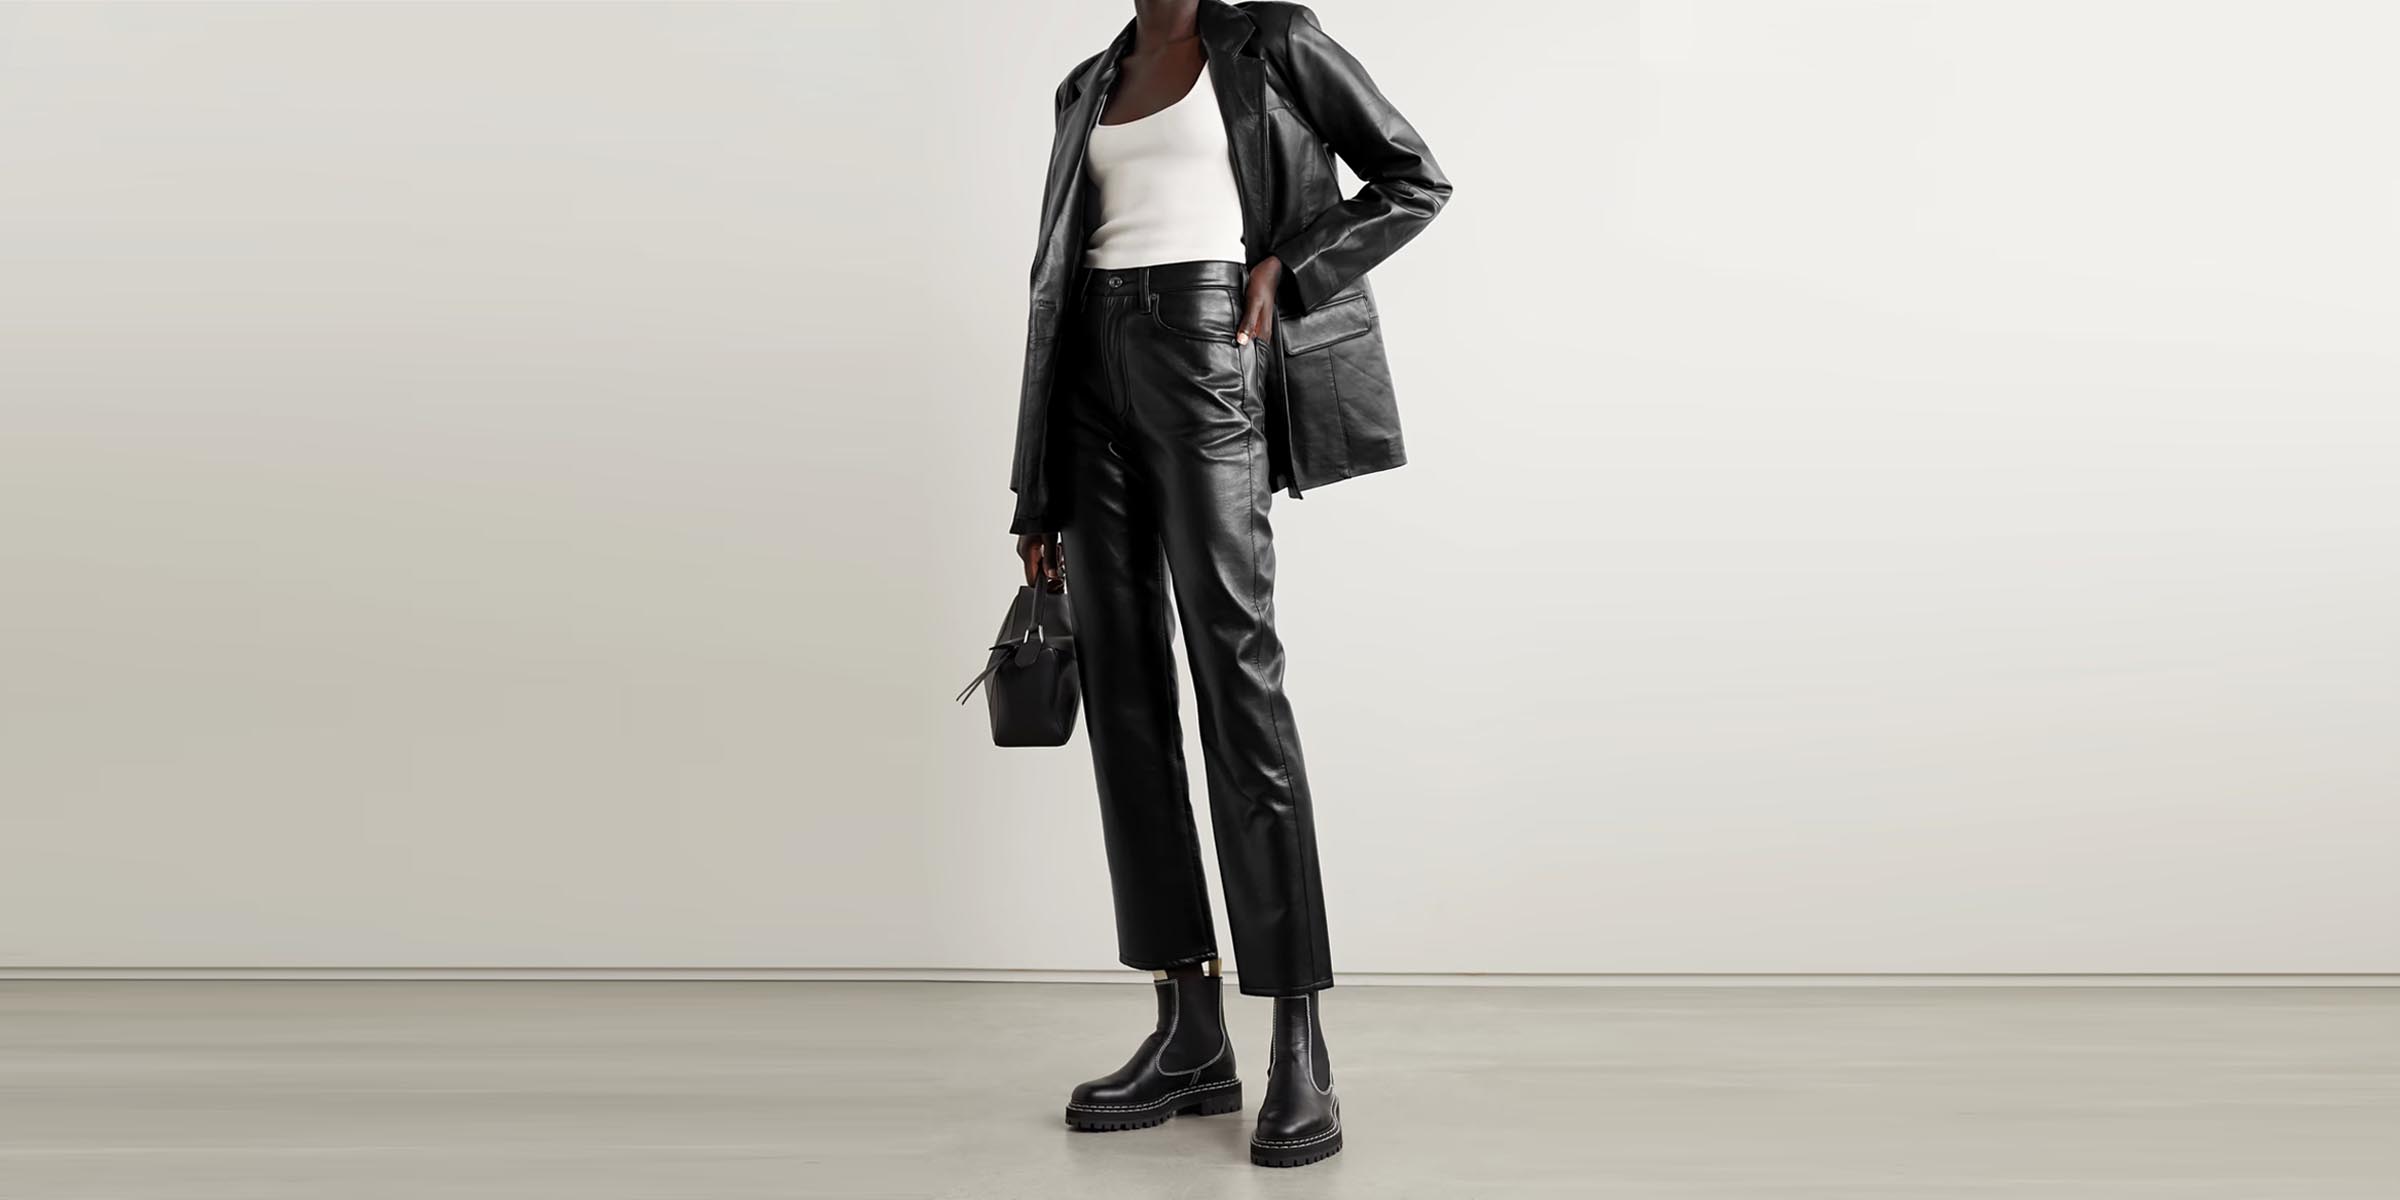 Leather is Back Best Leather Pants Jackets and Skirts for 20192020  Winter  Alley Girl  The Fashion Technology Blog based in New York